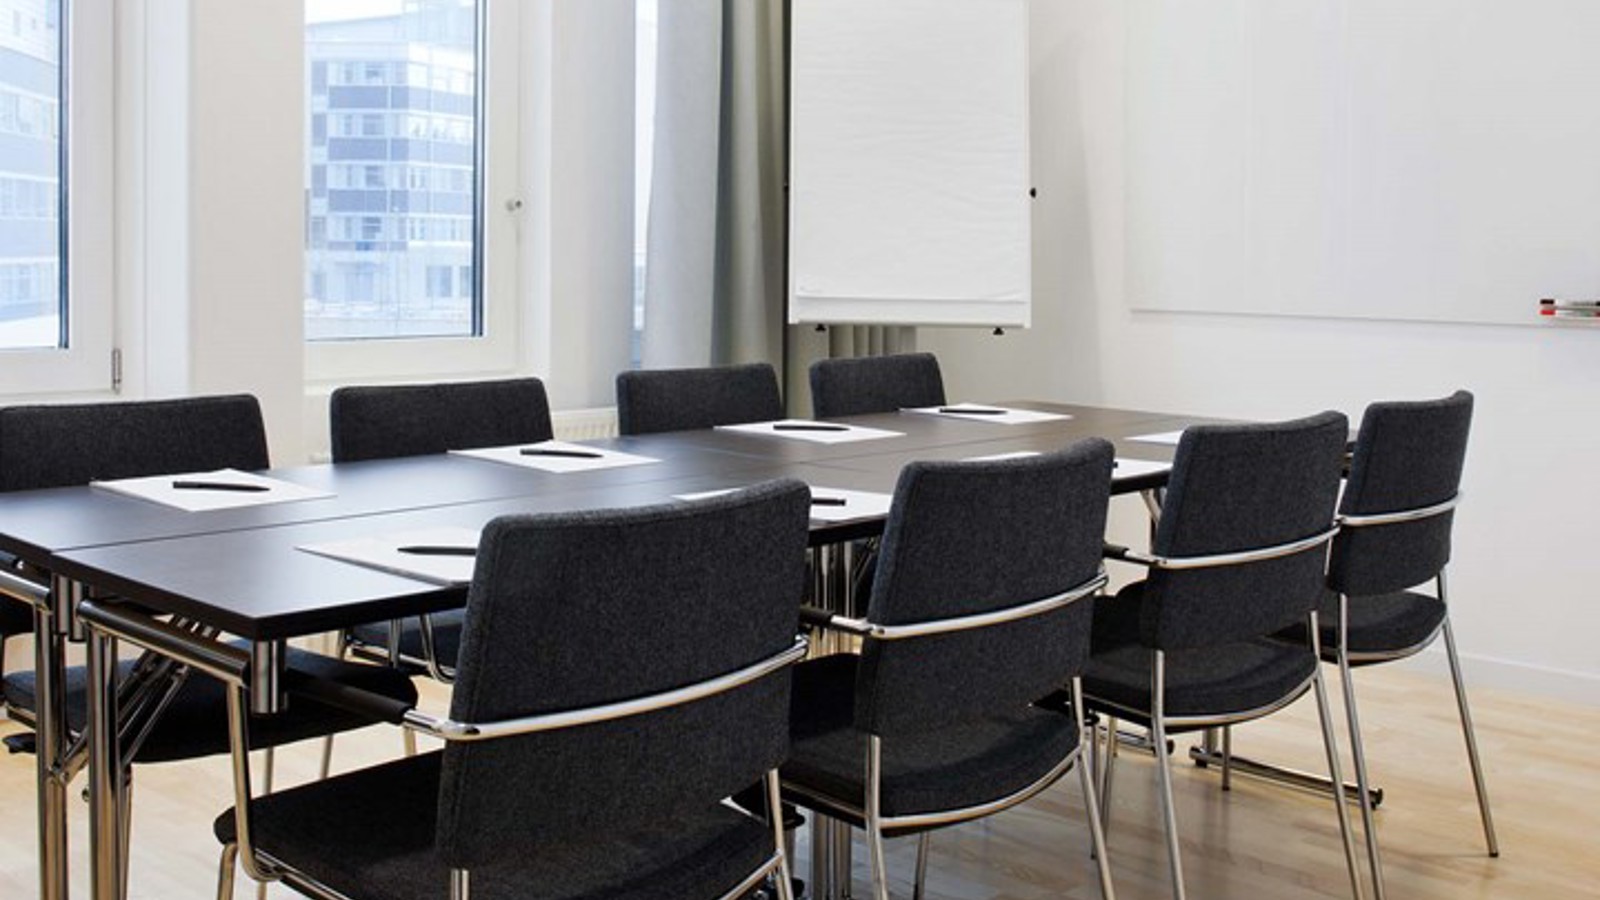 Conference room with board seating, brown table, dark chairs, white walls